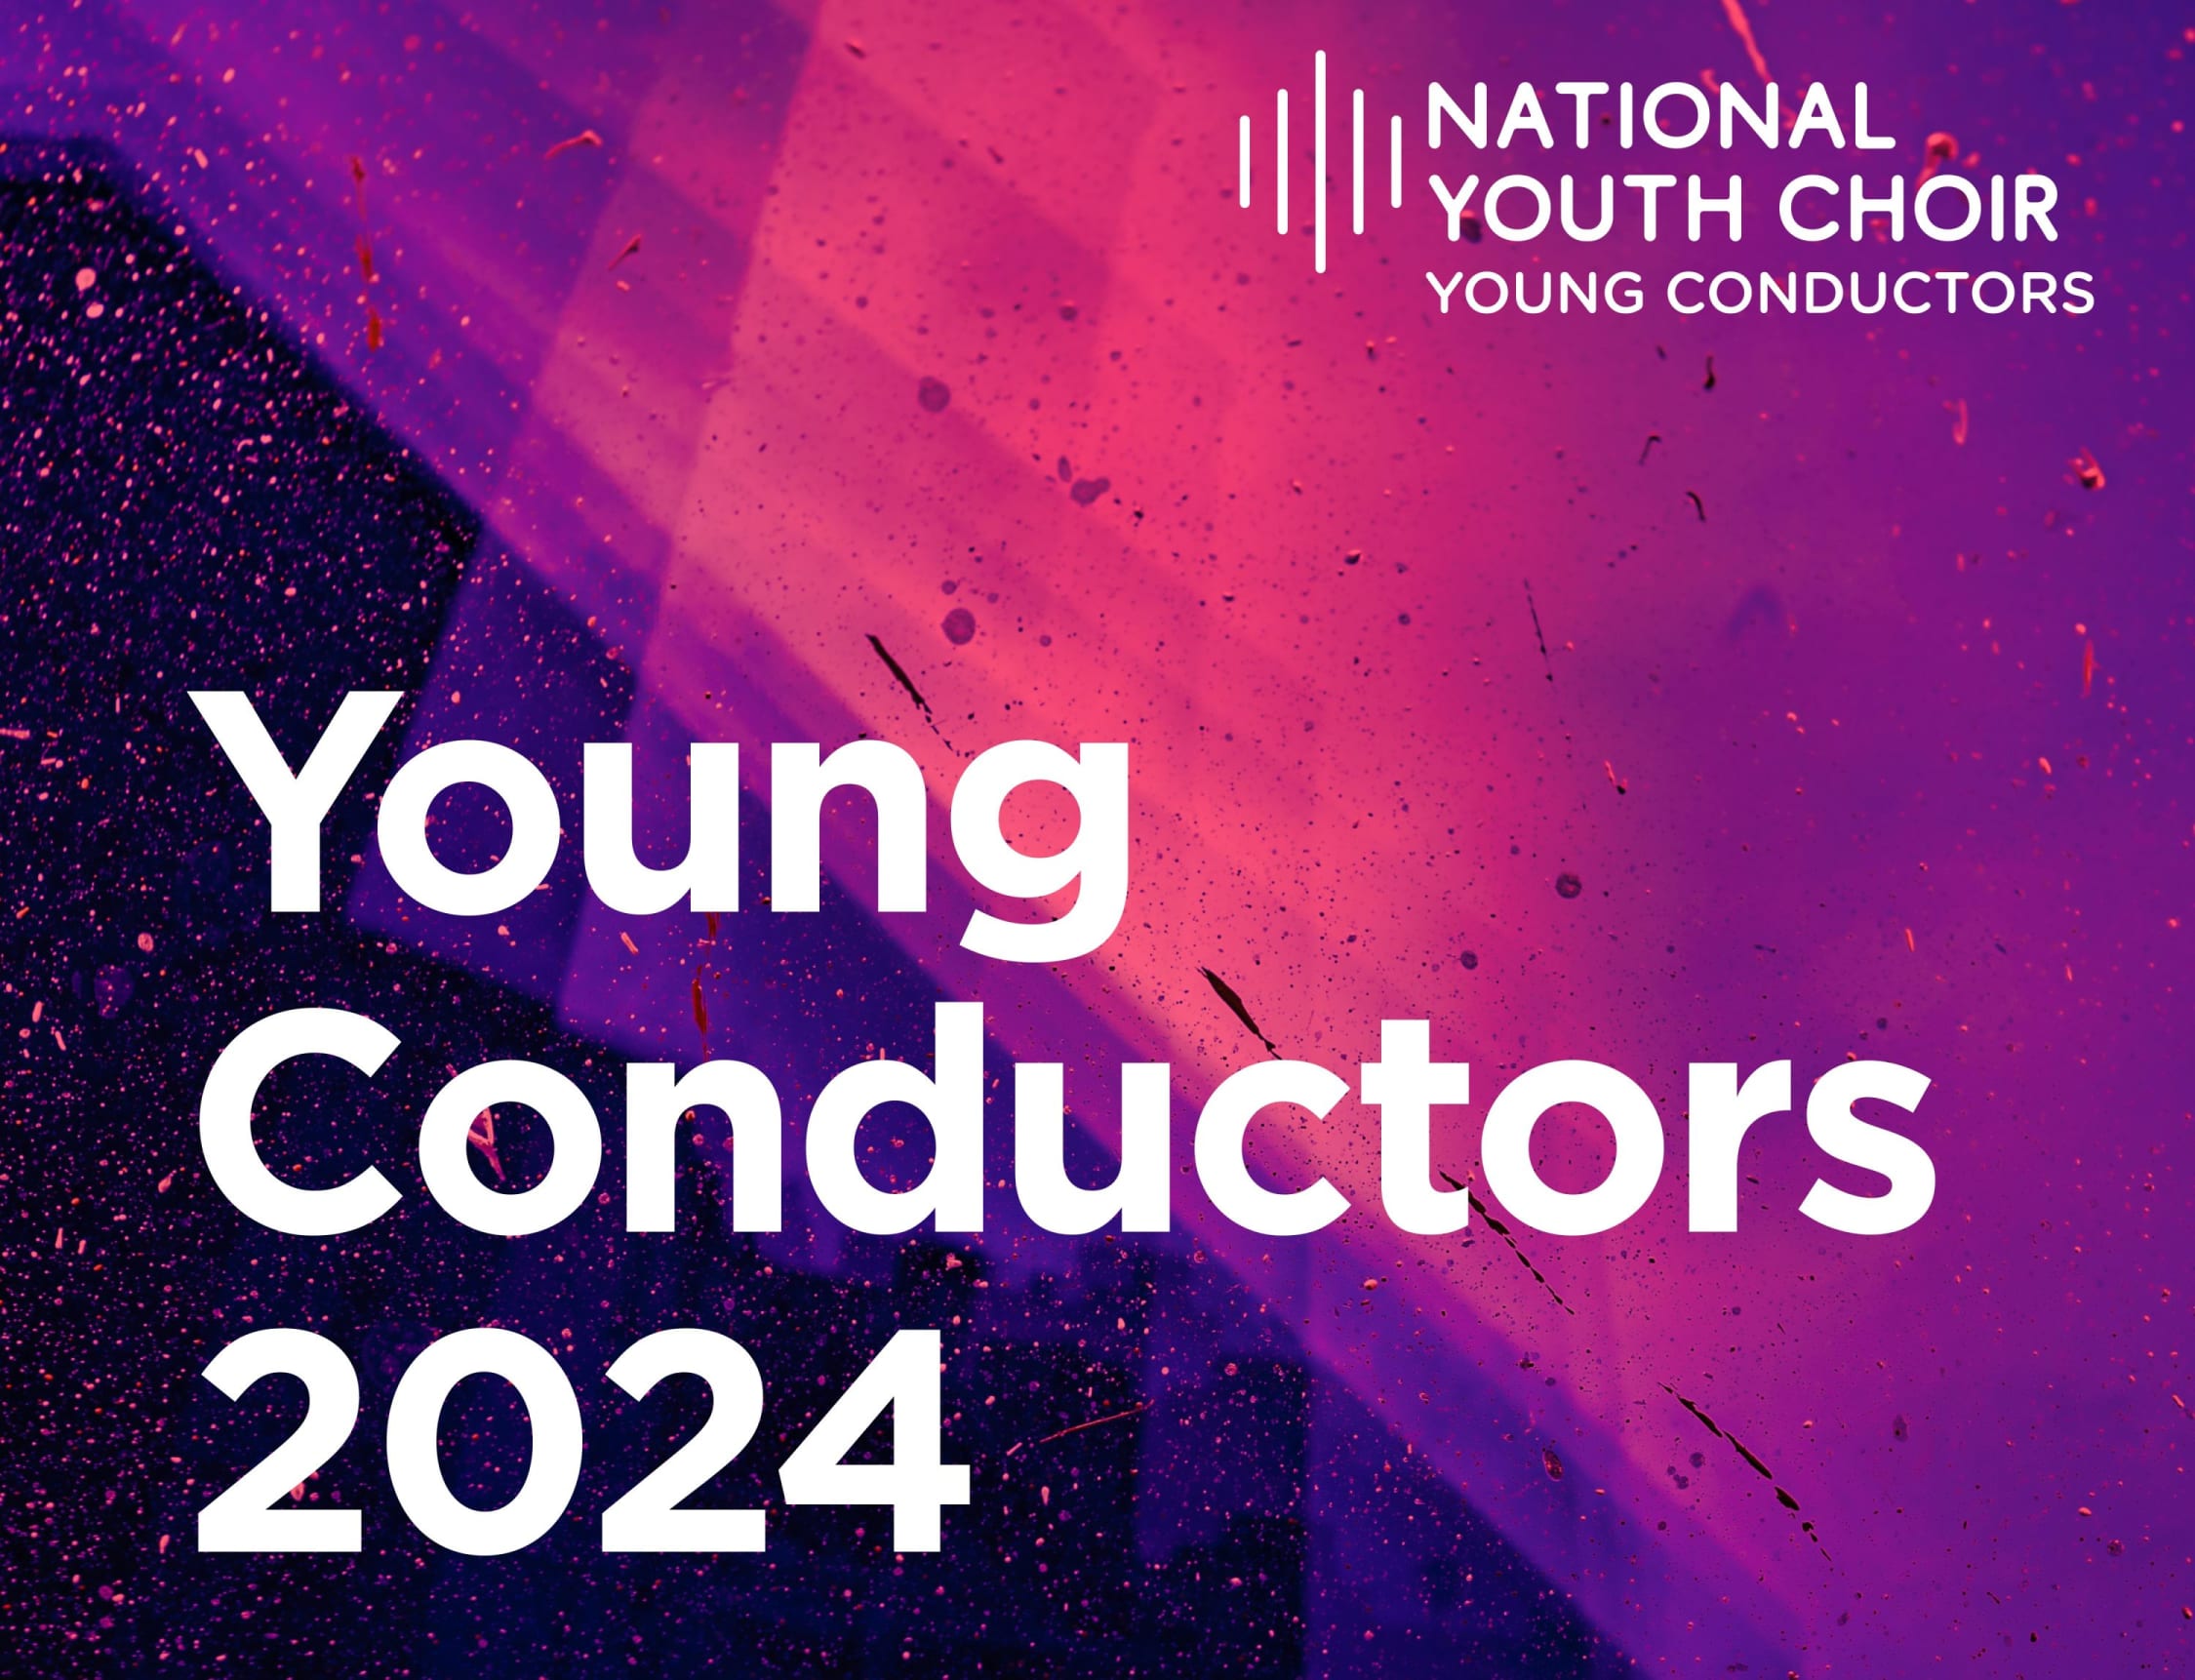 Graphic with text: National Youth Choir Young Conductors - Young Conductors 2024 with pink, purple and black abstract background